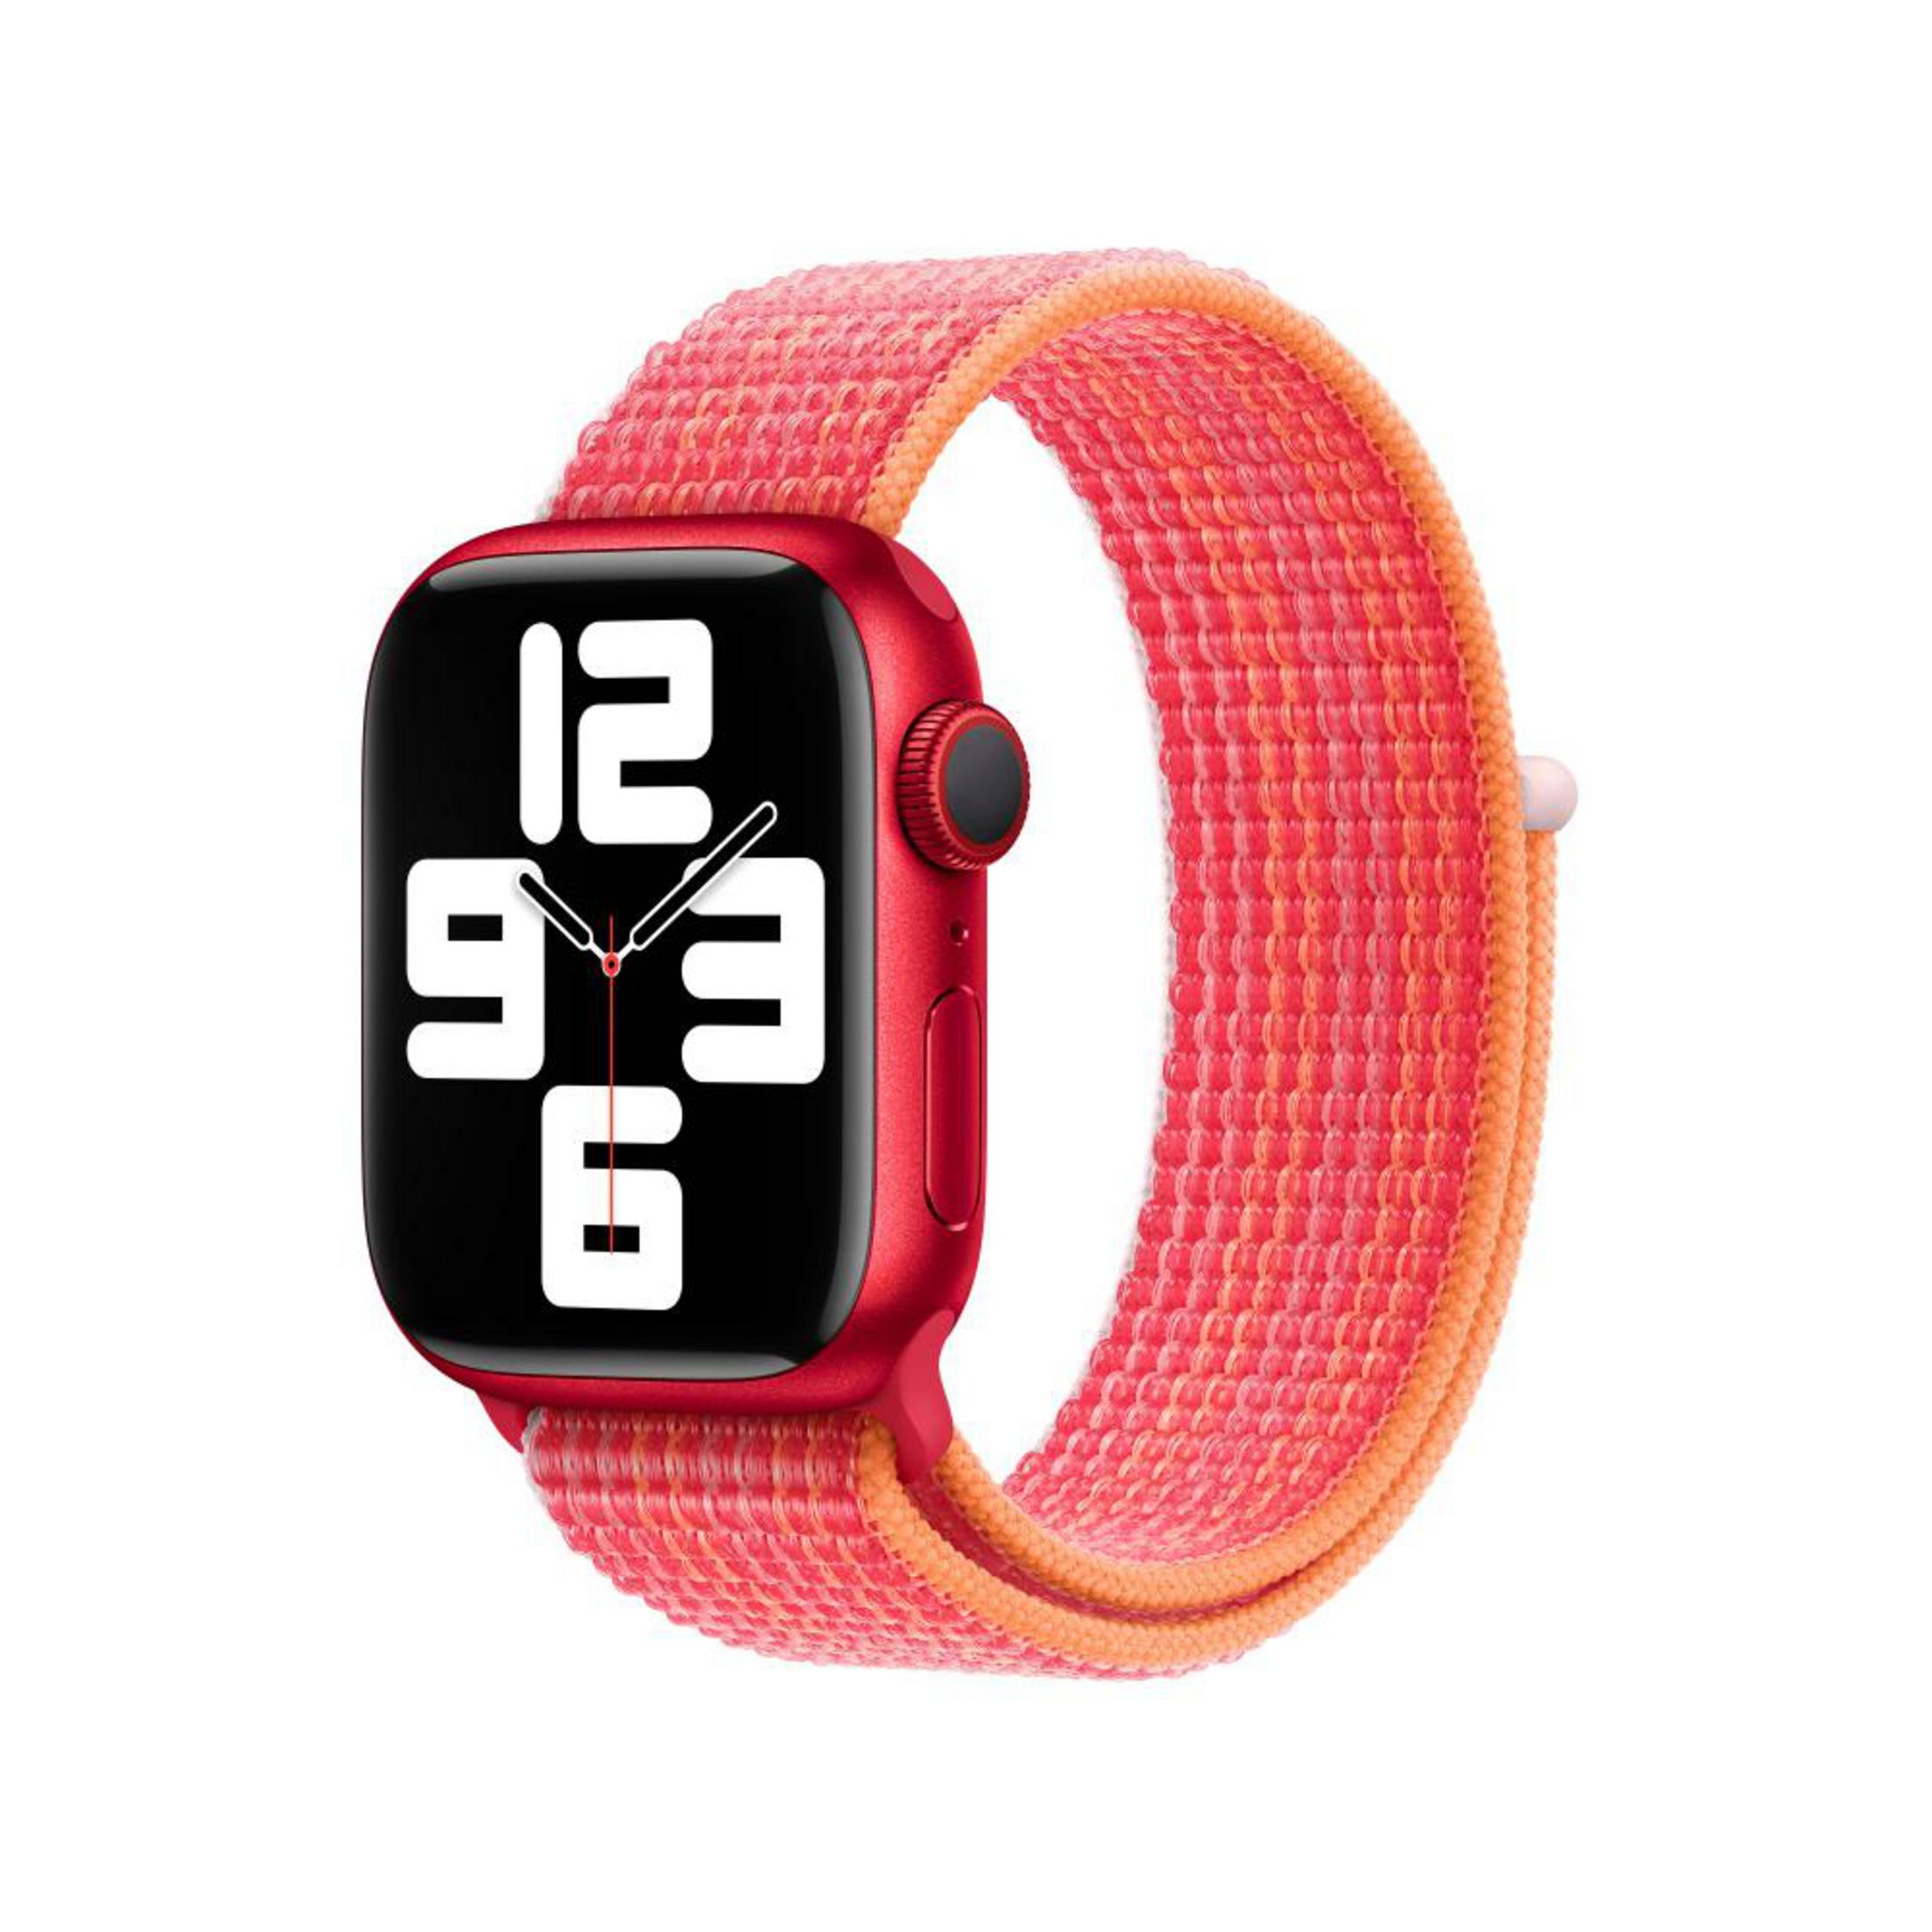 38 MPL83ZM/A Ersatzarmband, Watch 41 mm, Product-Red Apple, APPLE LOOP, Modelle: mm, mm, 41MM SPORT 40 RED